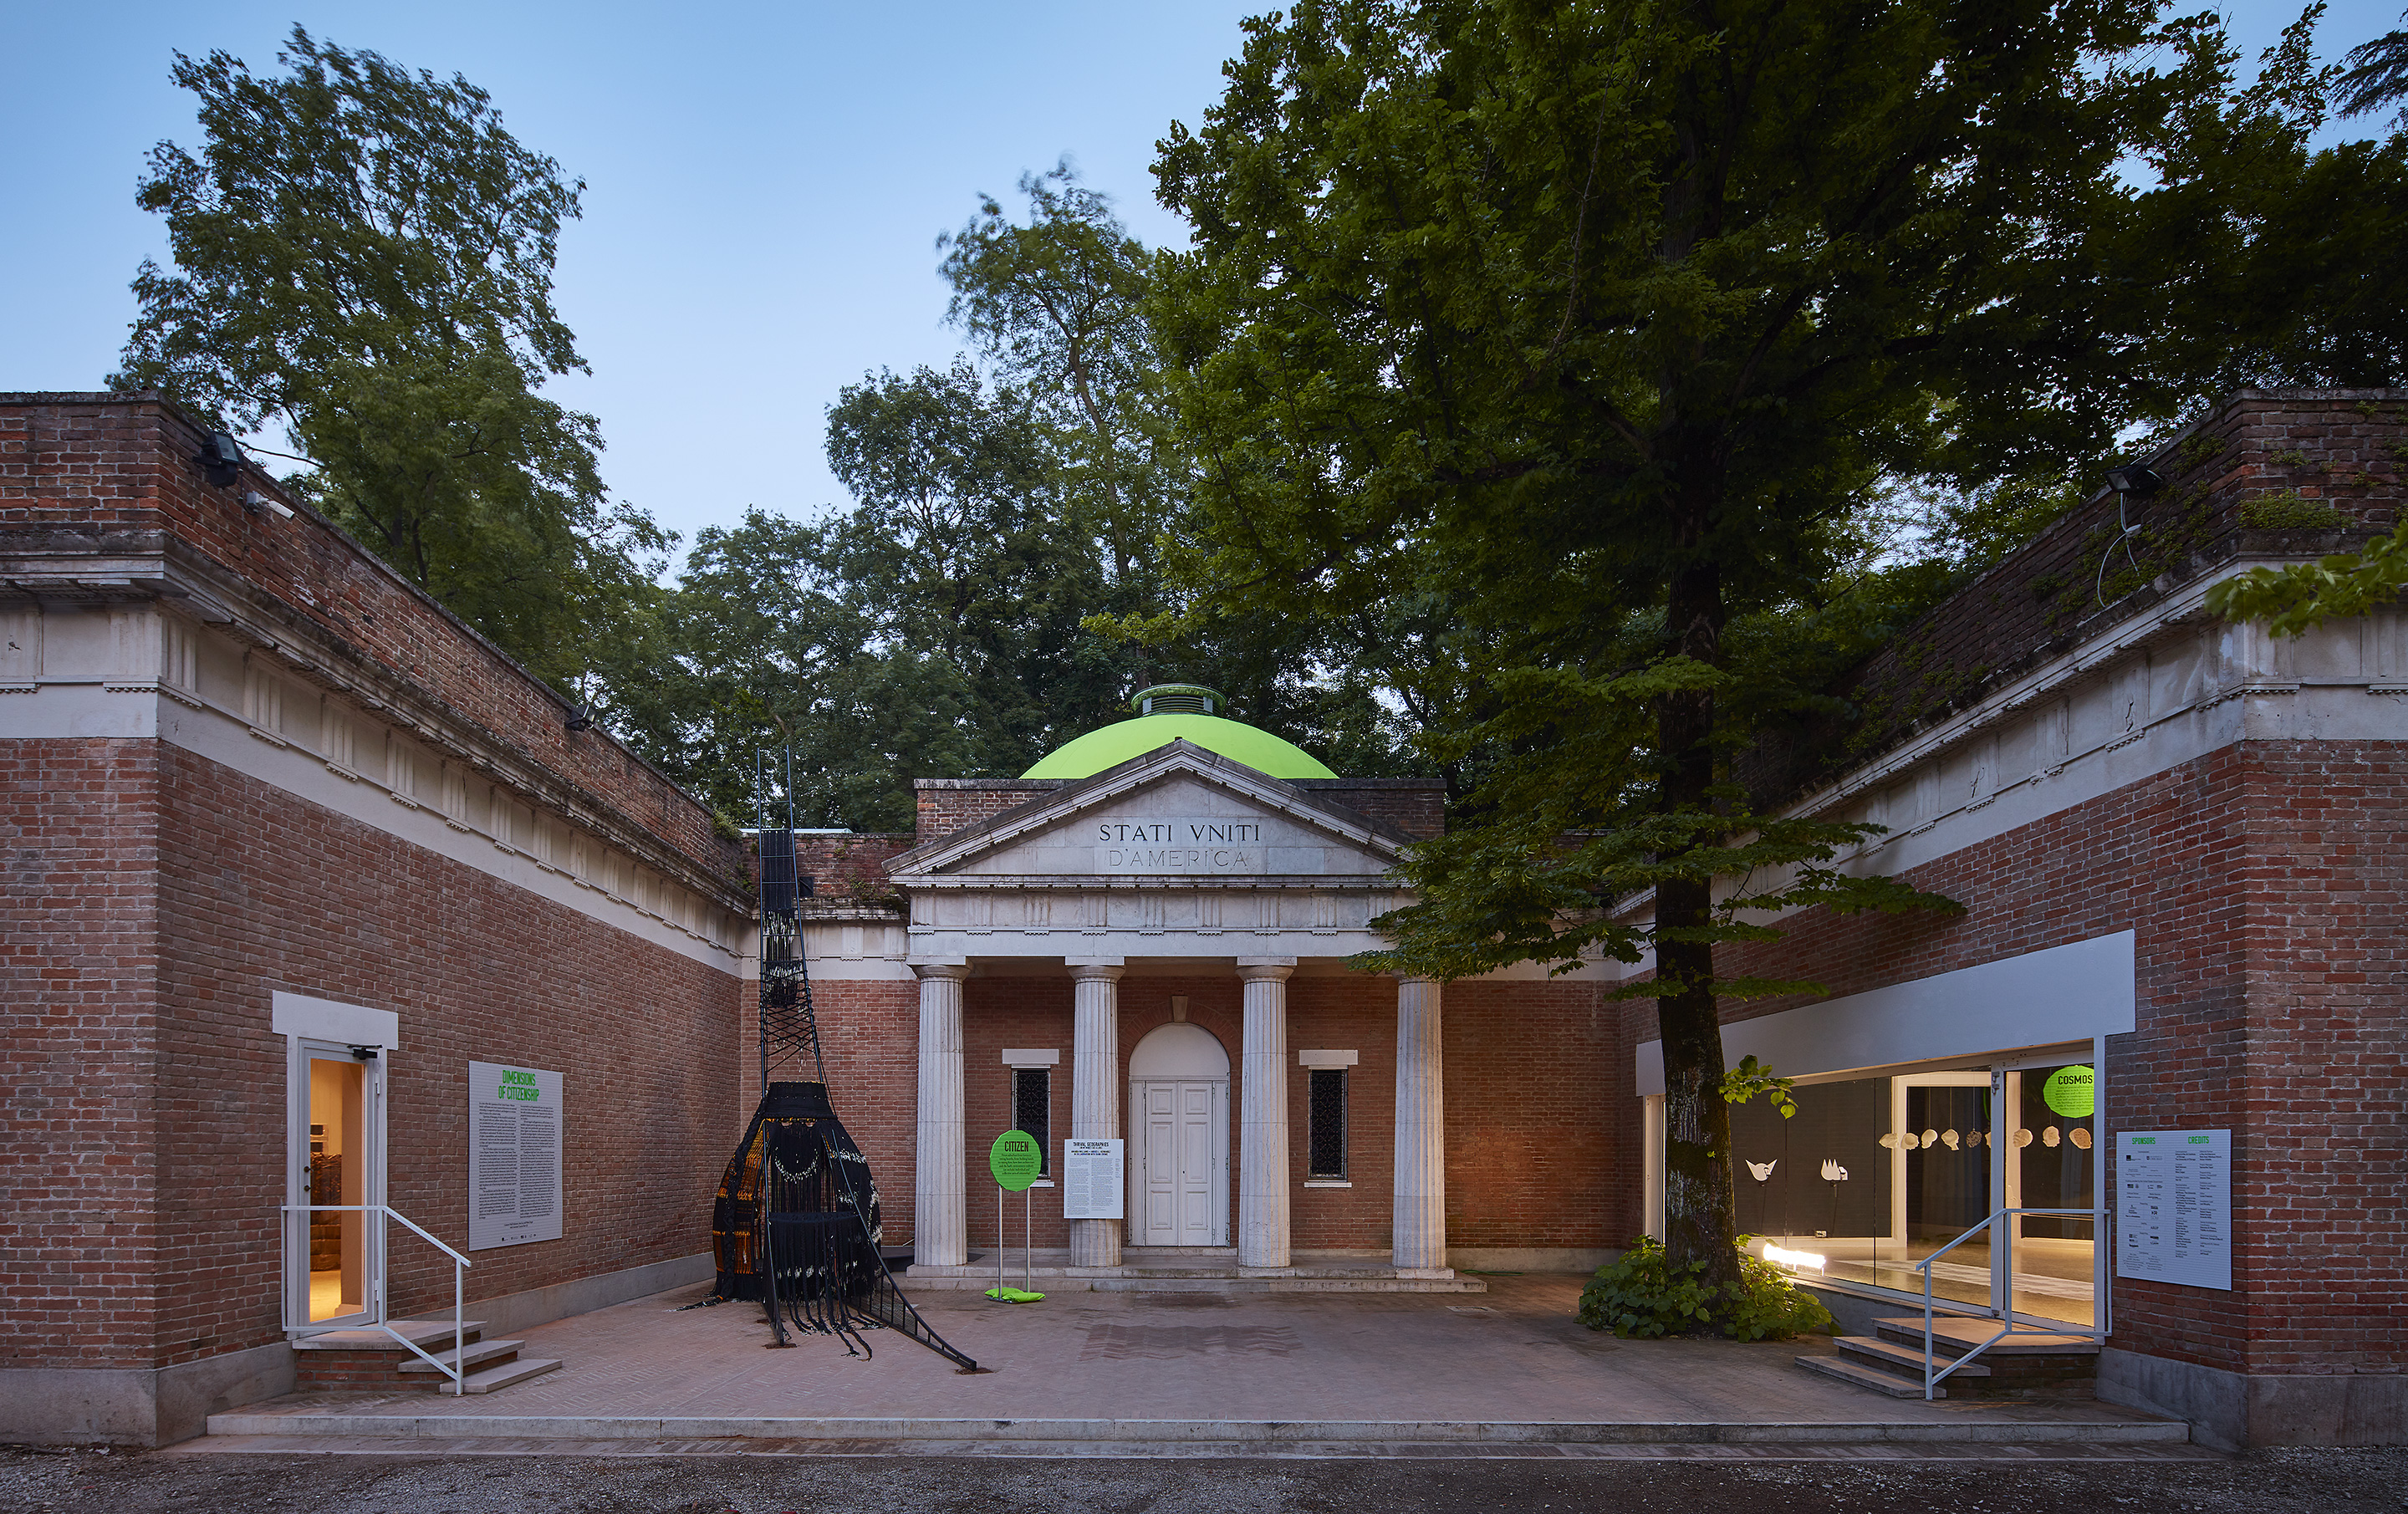 Image: The 2018 U.S. Pavilion. The image shows an exterior view of the U.S. Pavilion at dusk with light glowing from the windows of the gallery spaces. Photo © Tom Harris. Courtesy of the School of the Art Institute of Chicago and the University of Chicago.